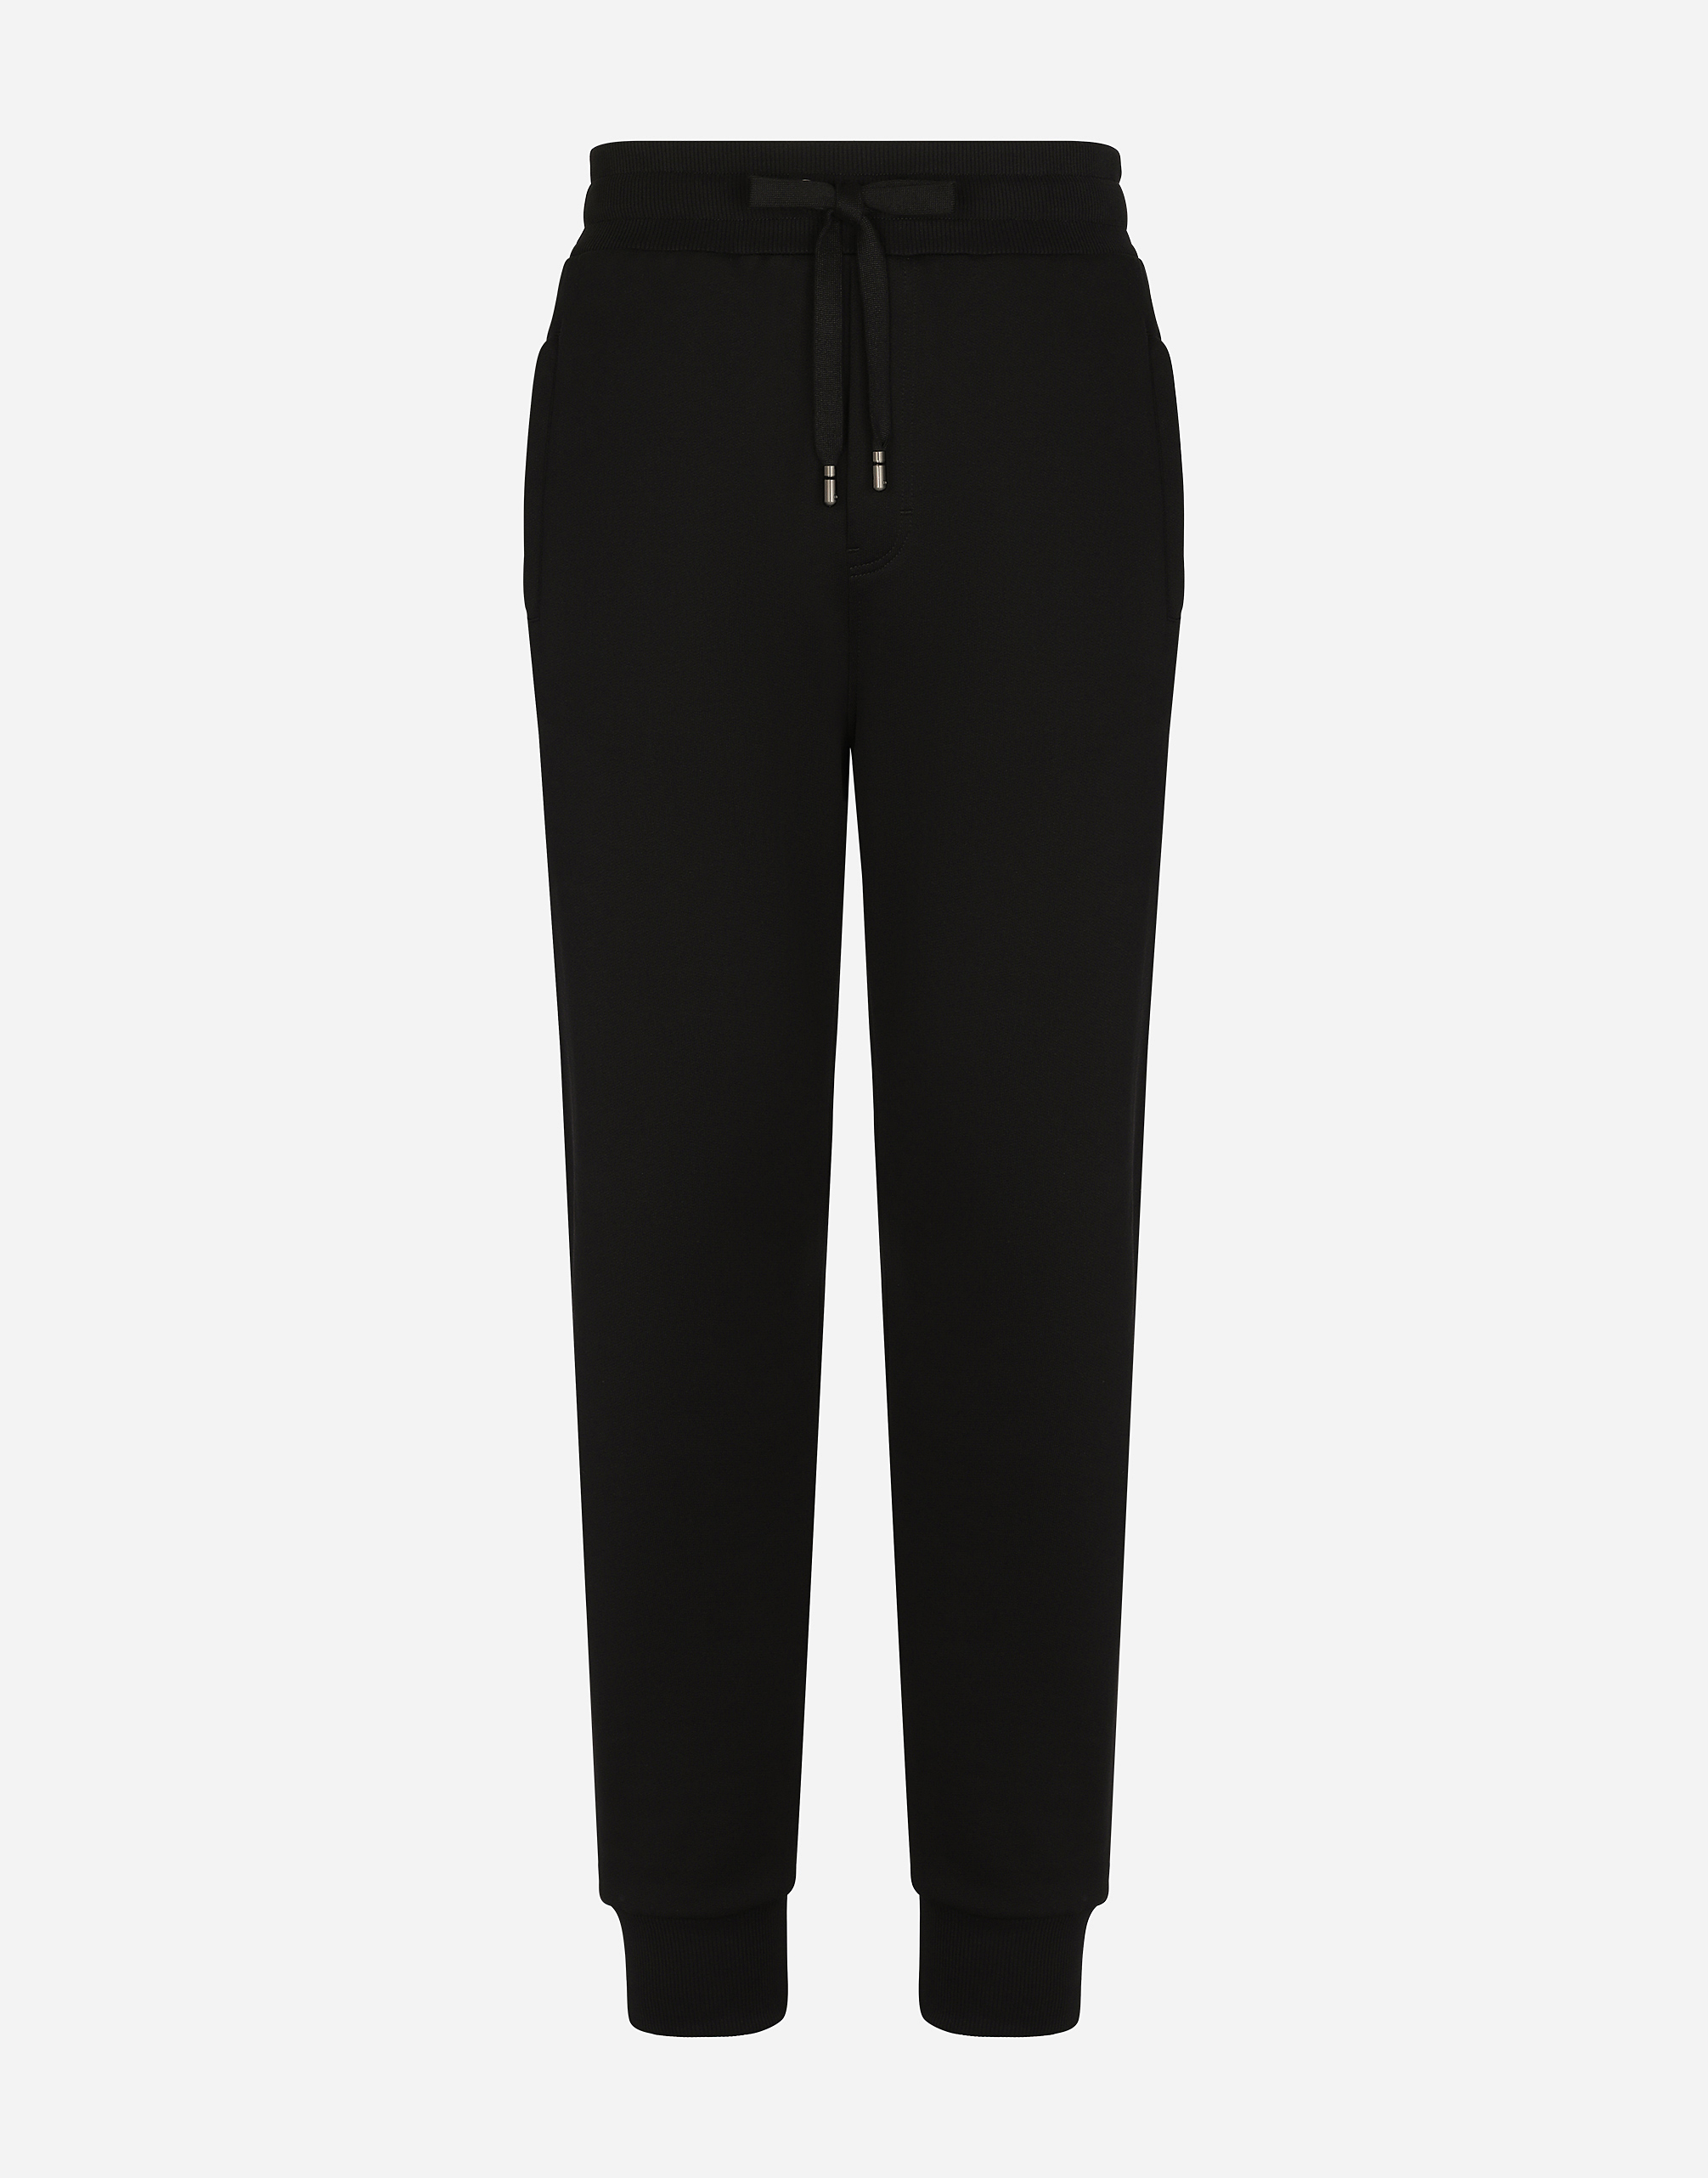 Jersey jogging pants with DG print in Black